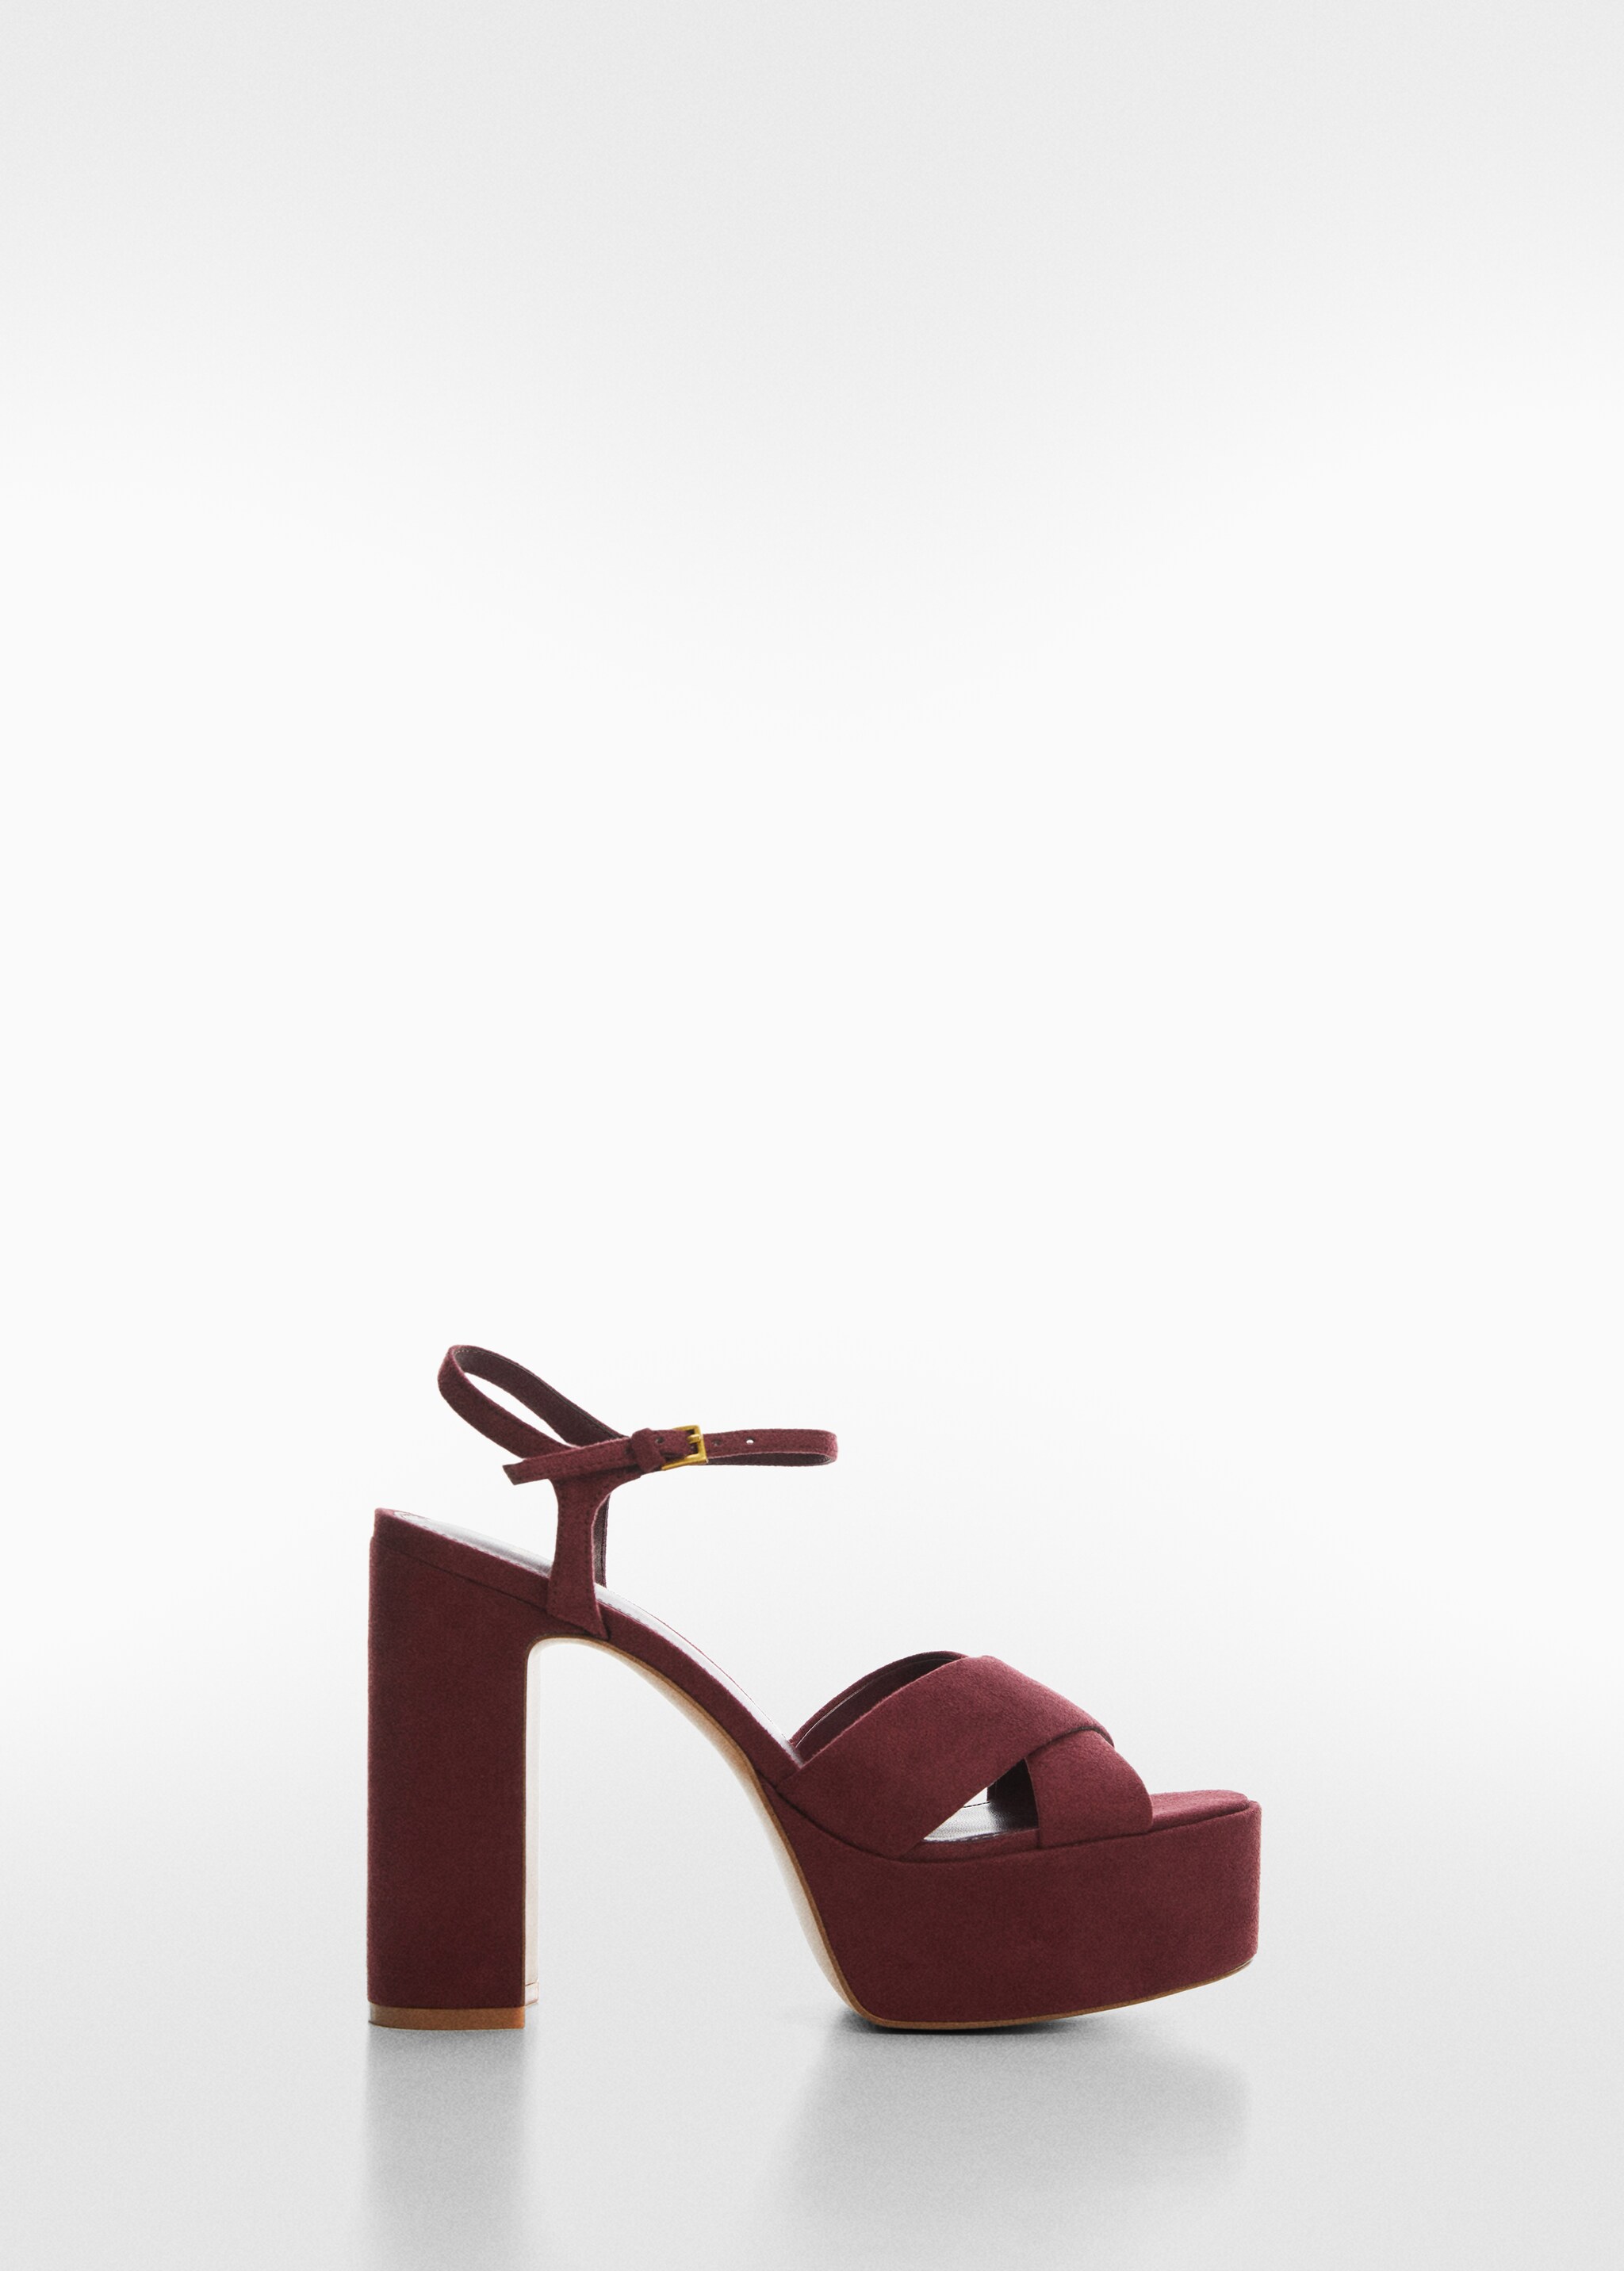 Platform sandals with crossed straps - Article without model